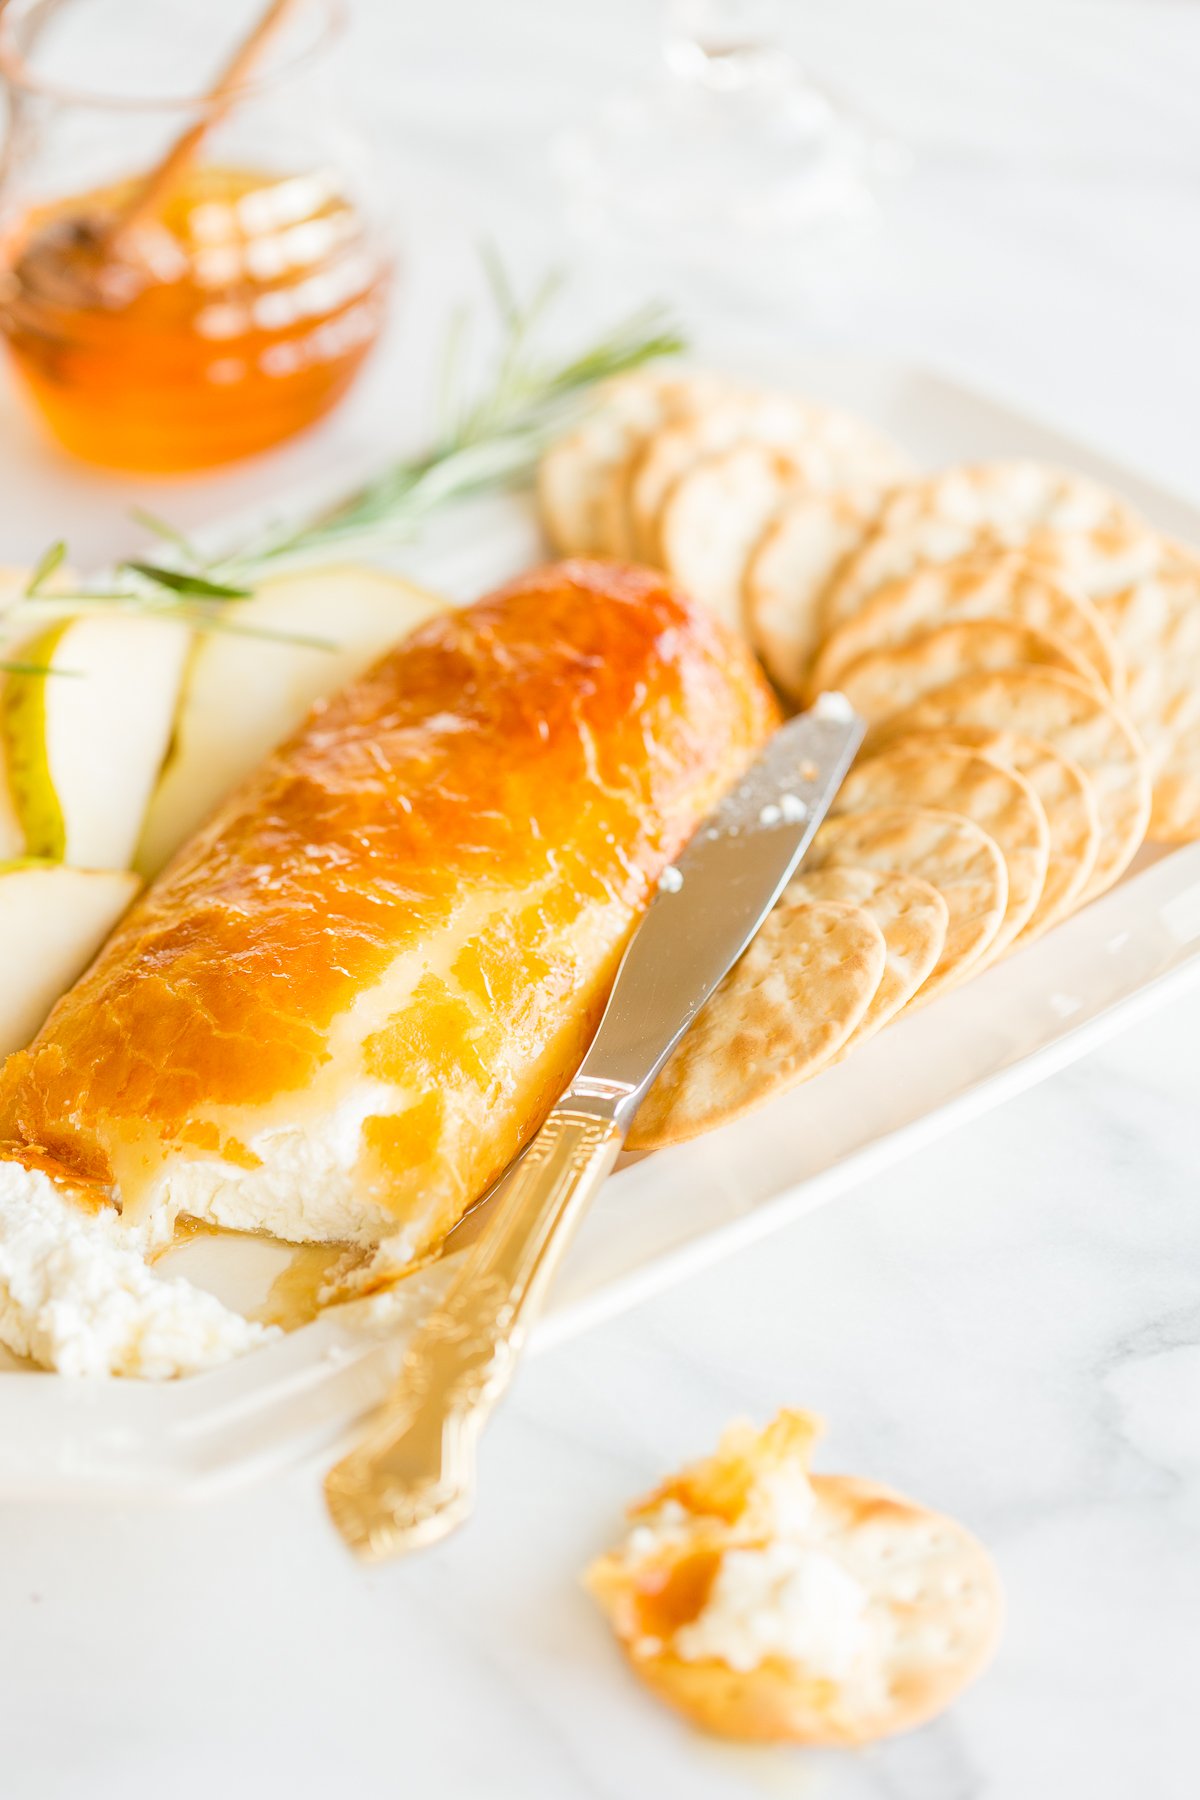 Baked goat cheese topped with honey with sliced pears and crackers for serving.